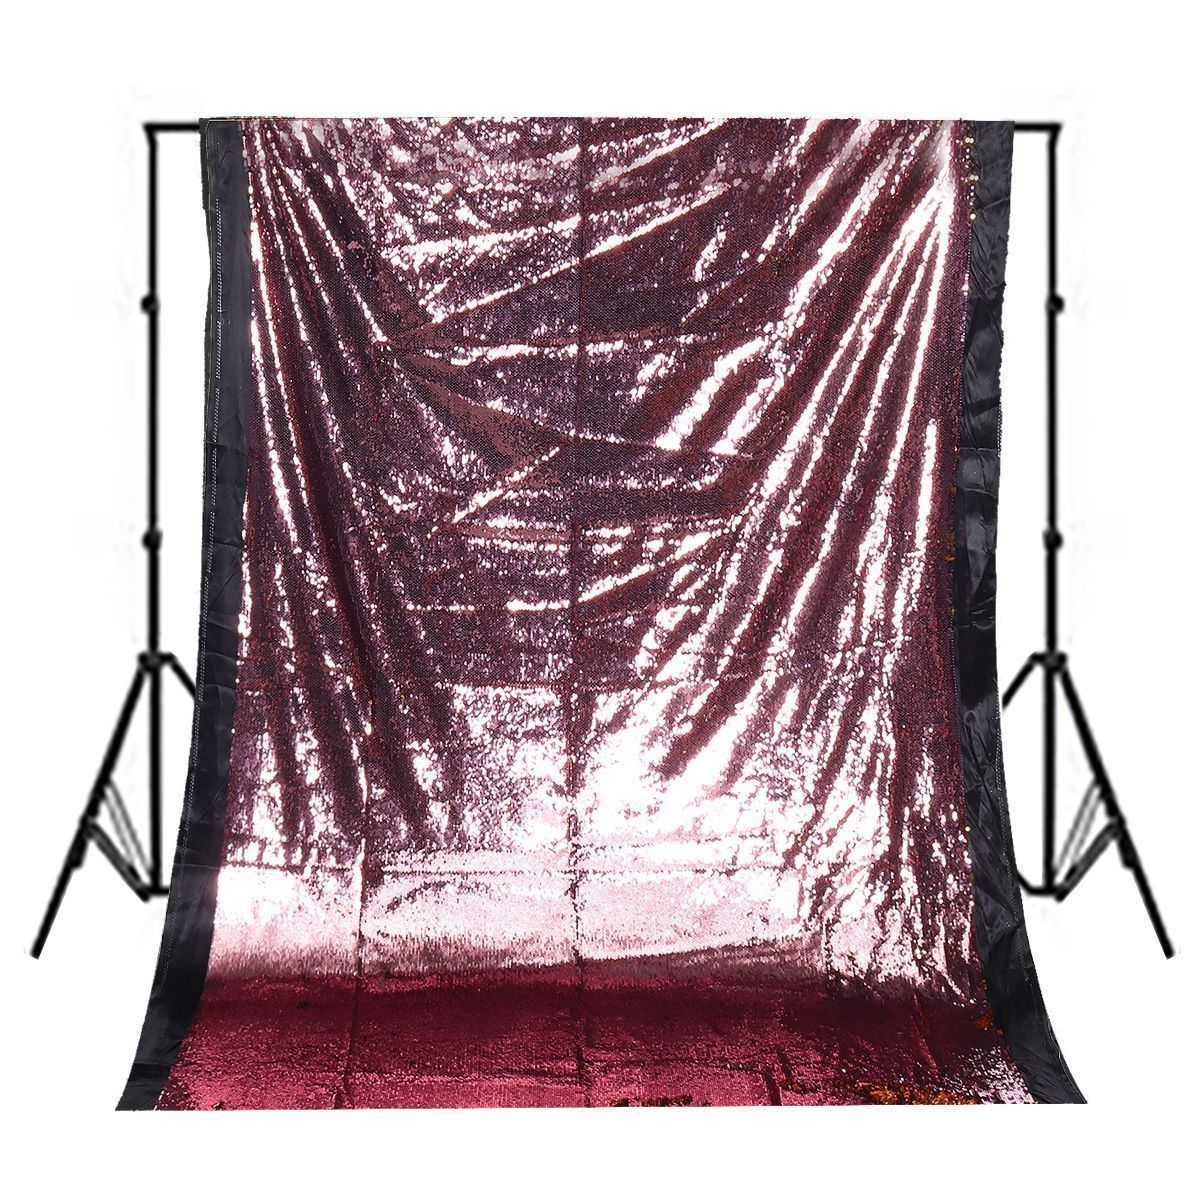 13x19m-Glitter-Sequin-Fabric-Photography-Backdrop-Curtain-Wedding-Party-Decor-1627473